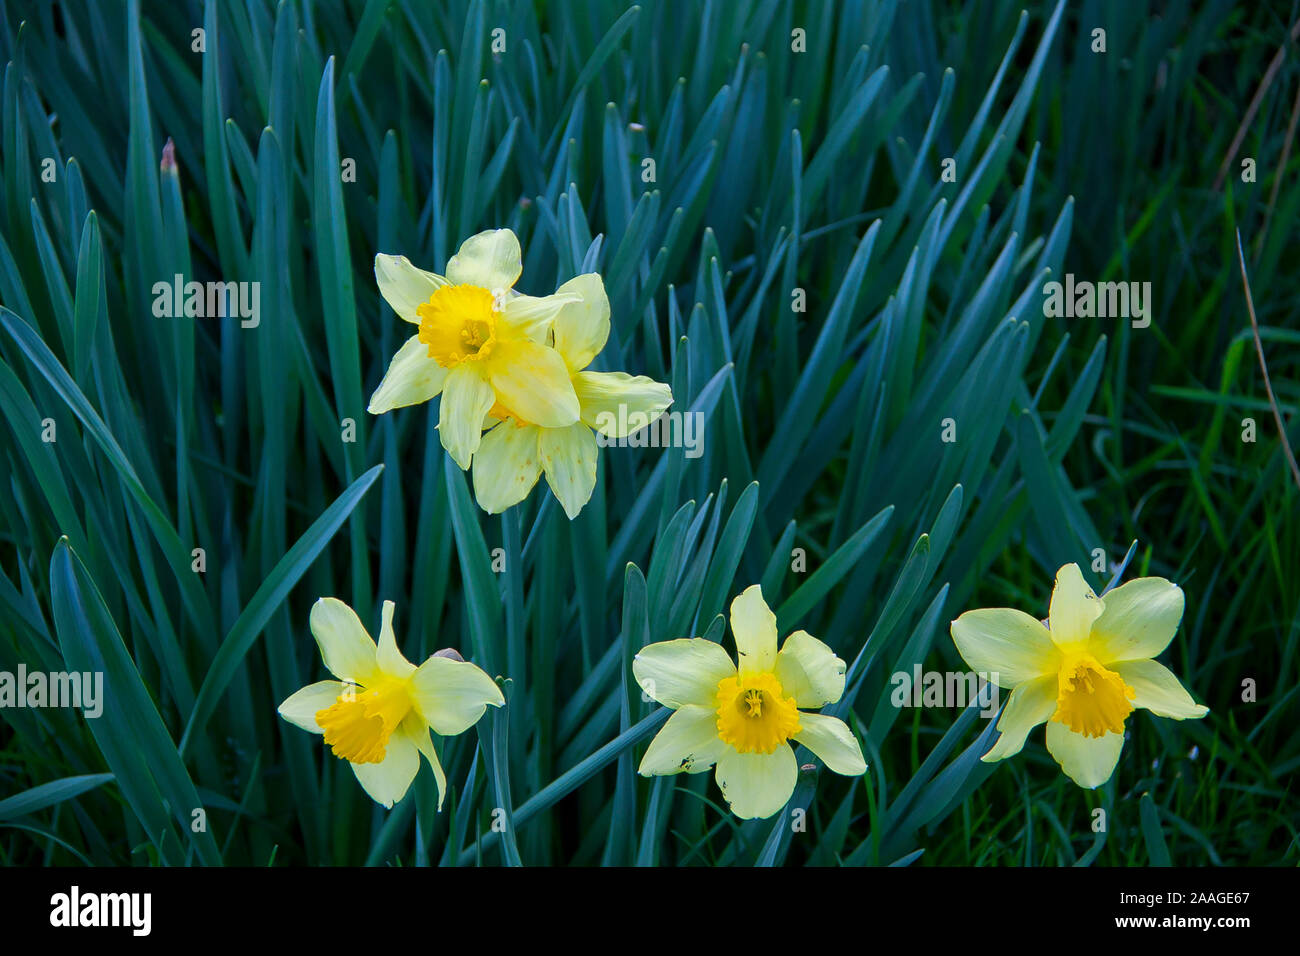 Yellow daffodils growing in the field Stock Photo